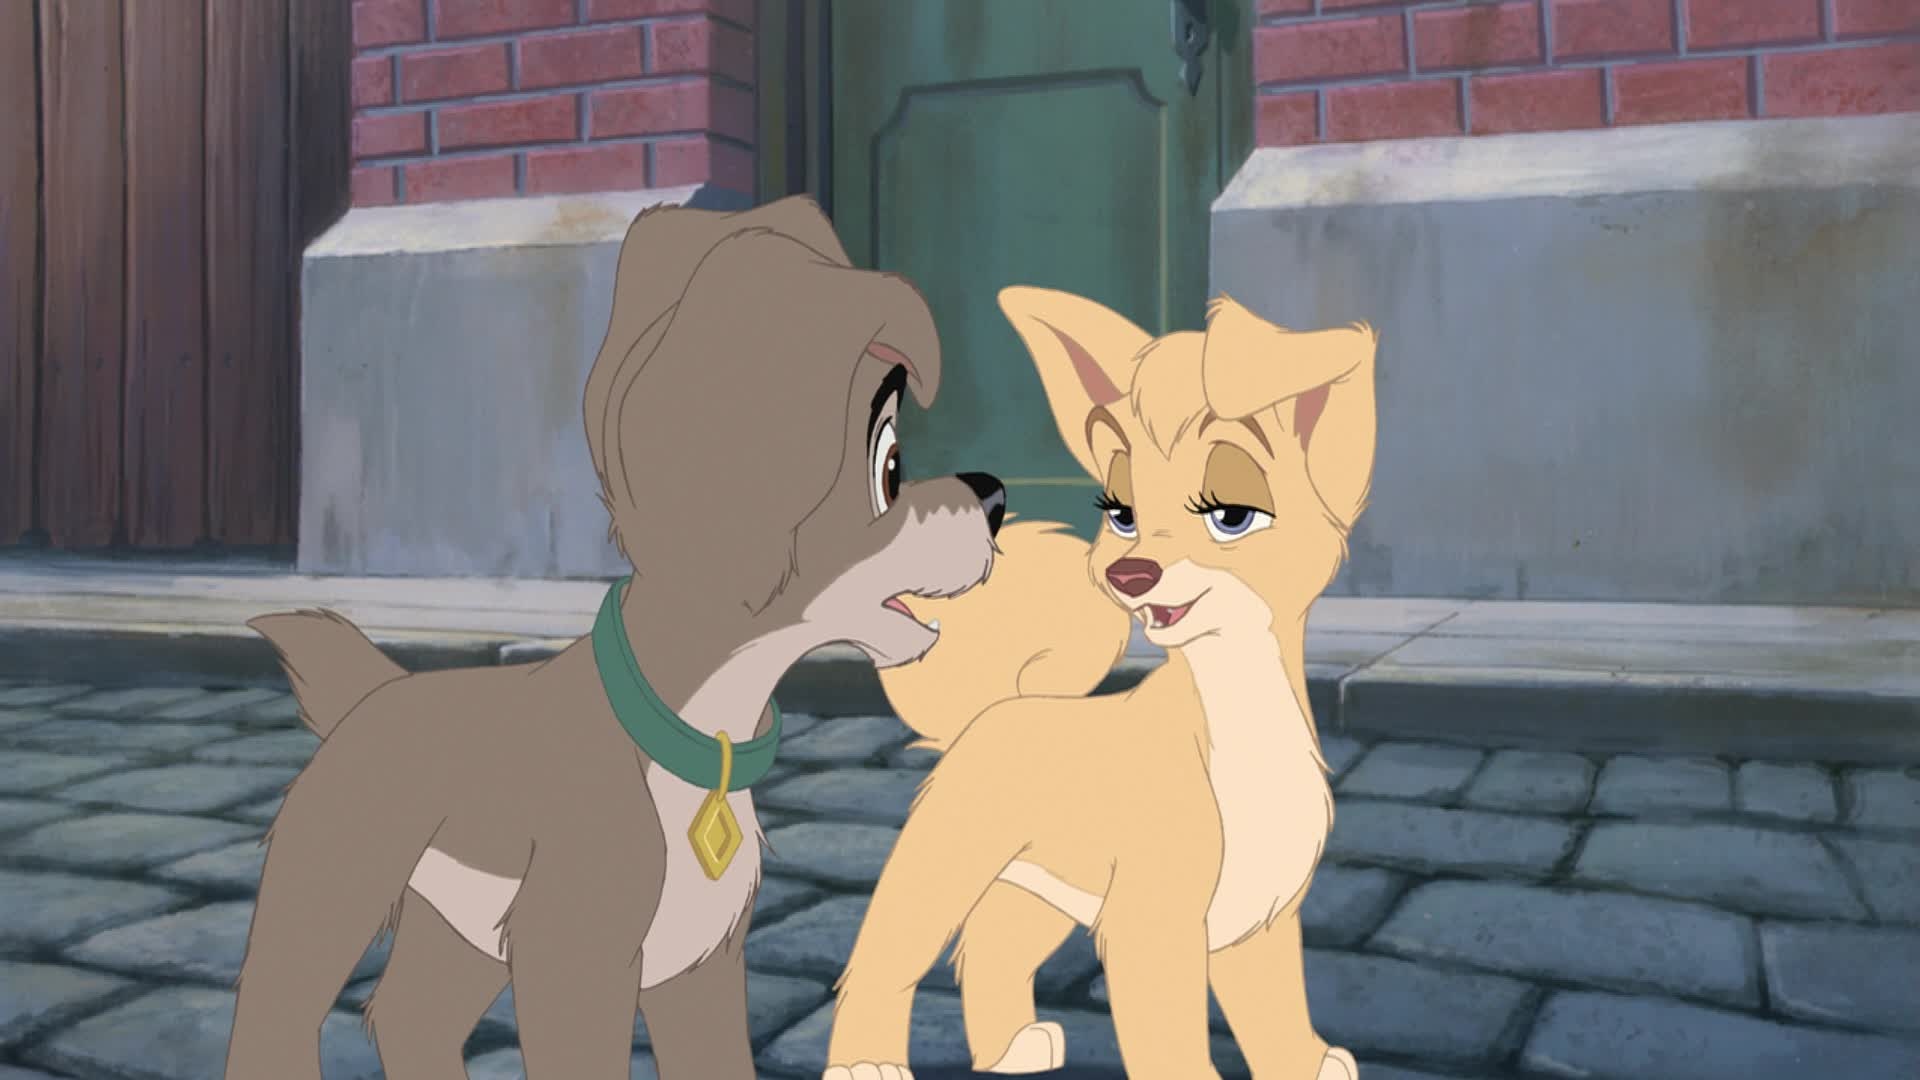 Lady and the Tramp, Angel and Scamp, Disney fan photo, Heartwarming moment, 1920x1080 Full HD Desktop